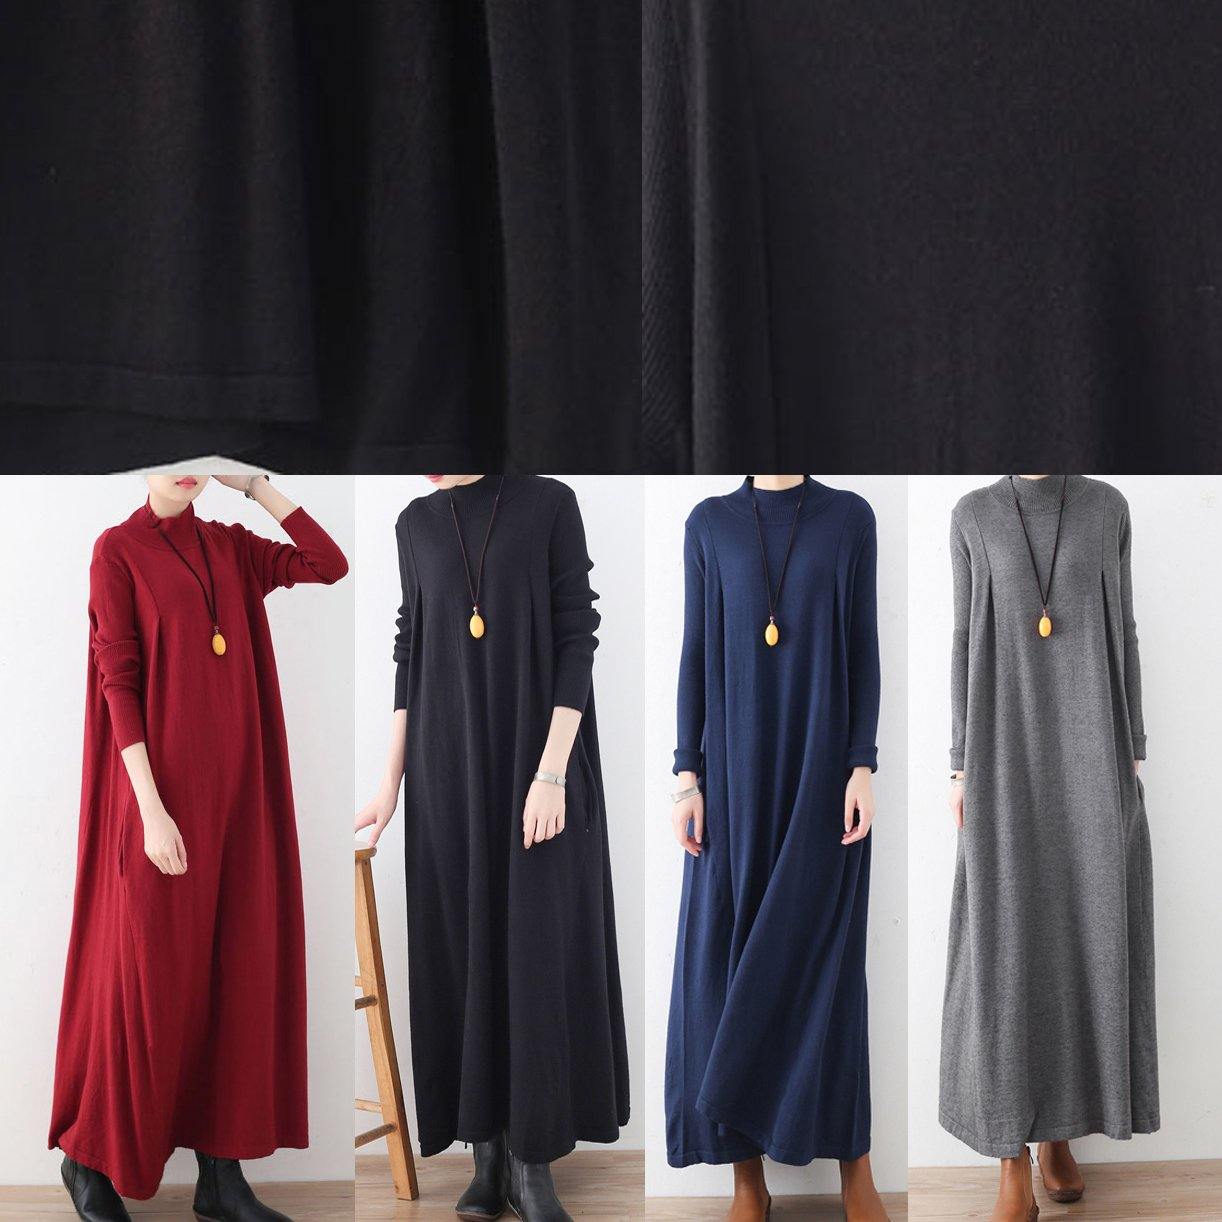 New red long sweaters plus size clothing high neck long knit sweaters women large hem pullover dresses - Omychic